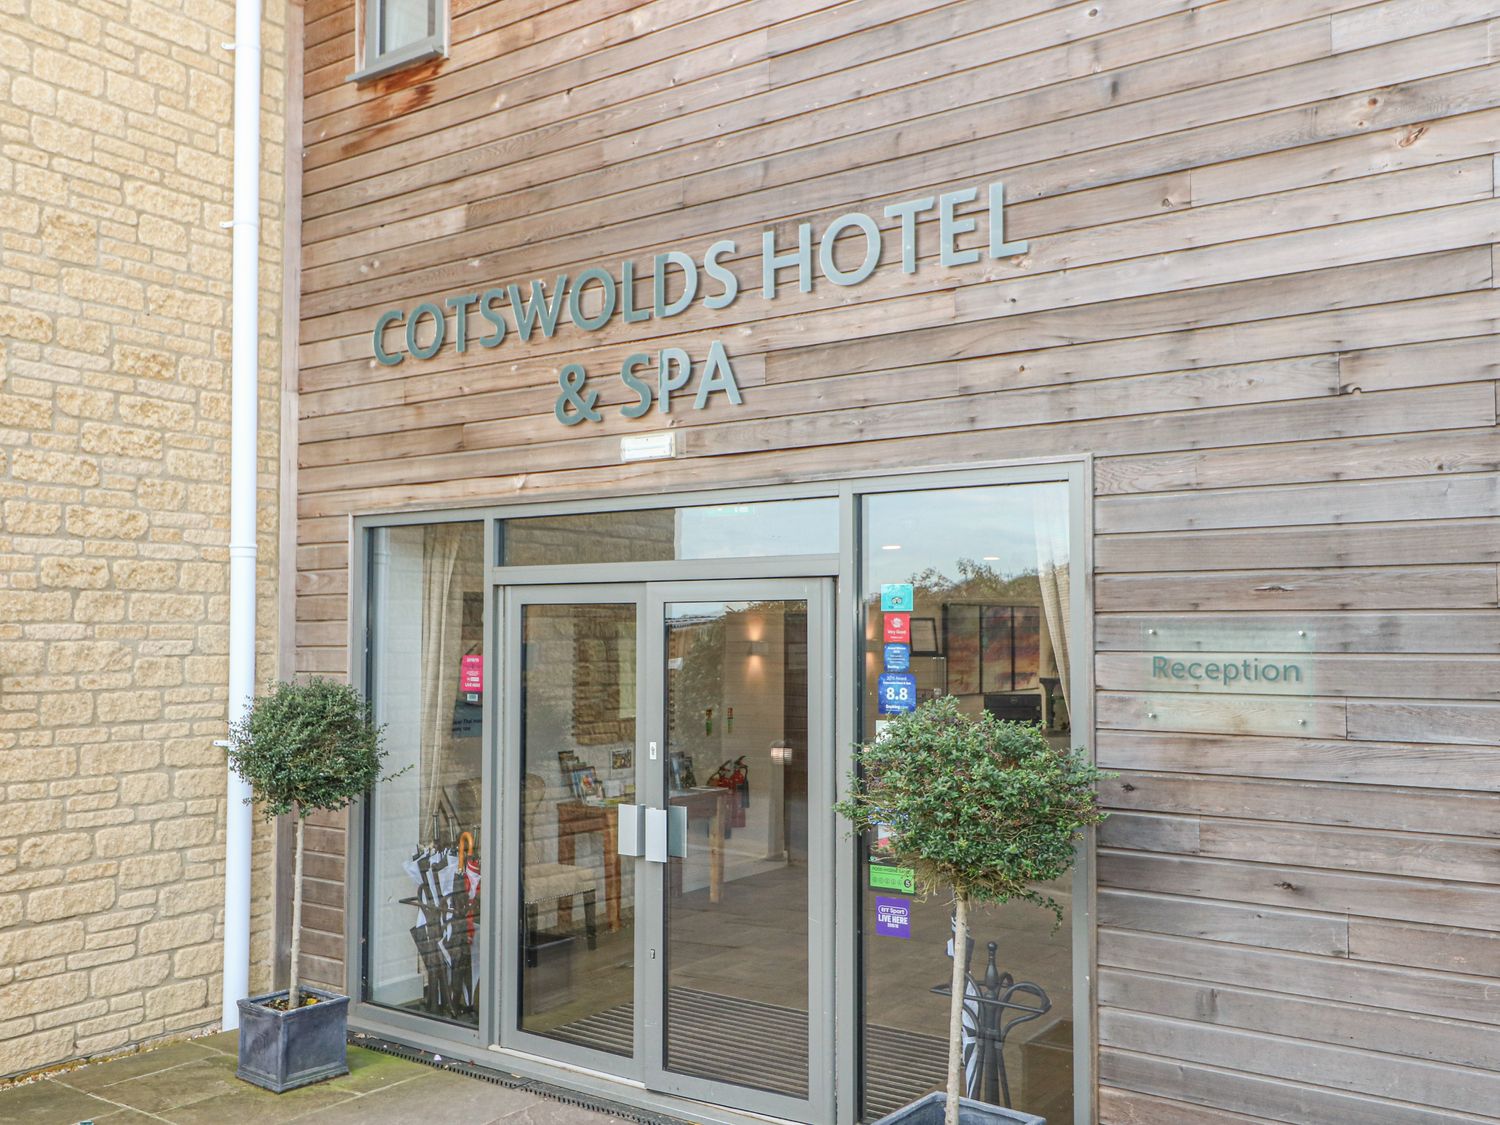 Cotswold Club Apartment (Sleeps 4 in 2 Bedrooms) - Cotswolds - 1037191 - photo 1